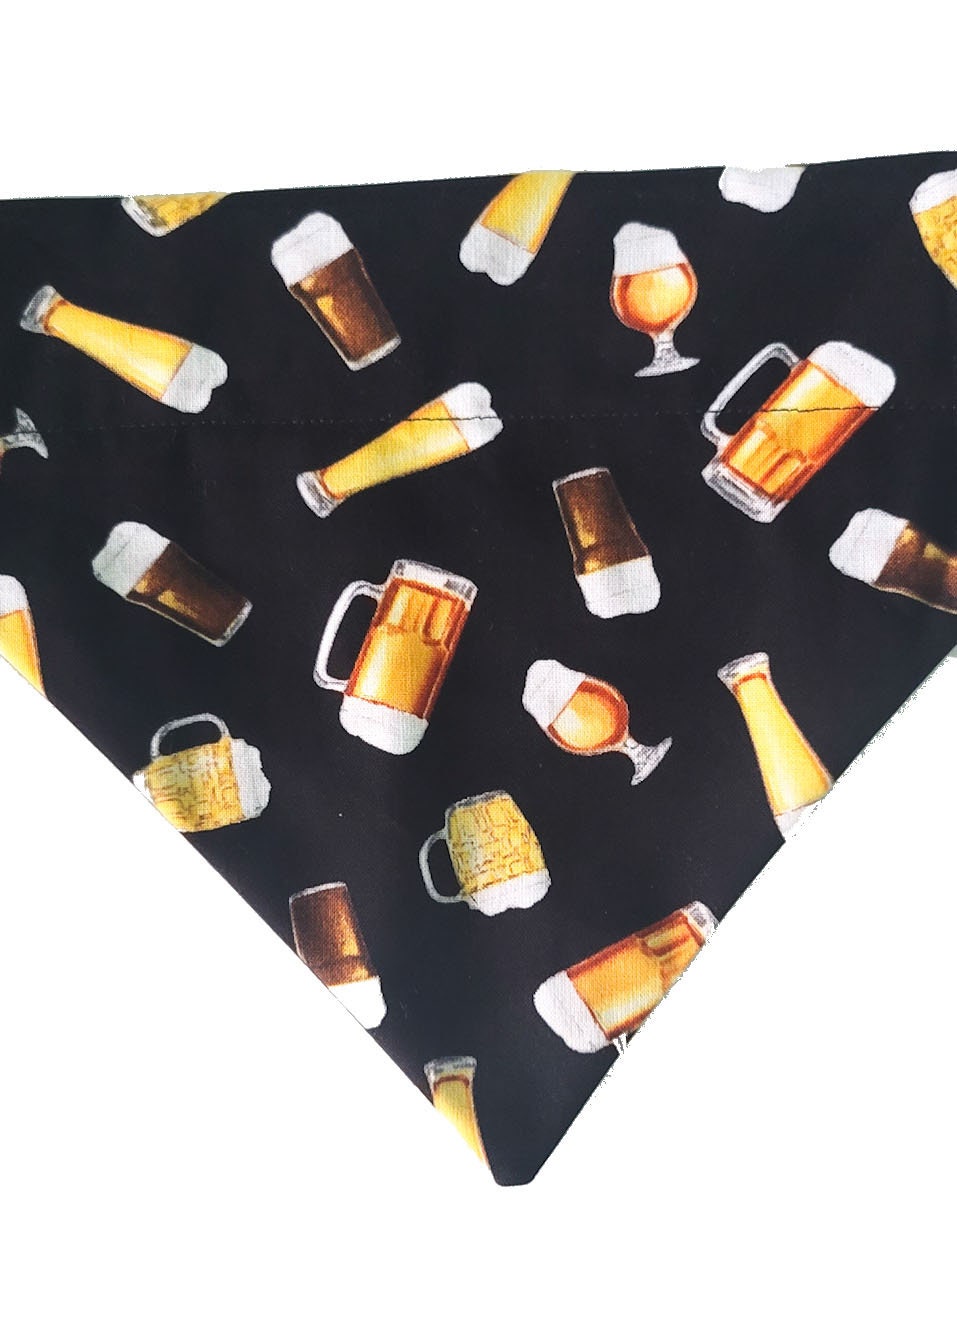 Craft Beer Over the Collar Dog Bandana That Slips Onto an Existing Collar Size Large 